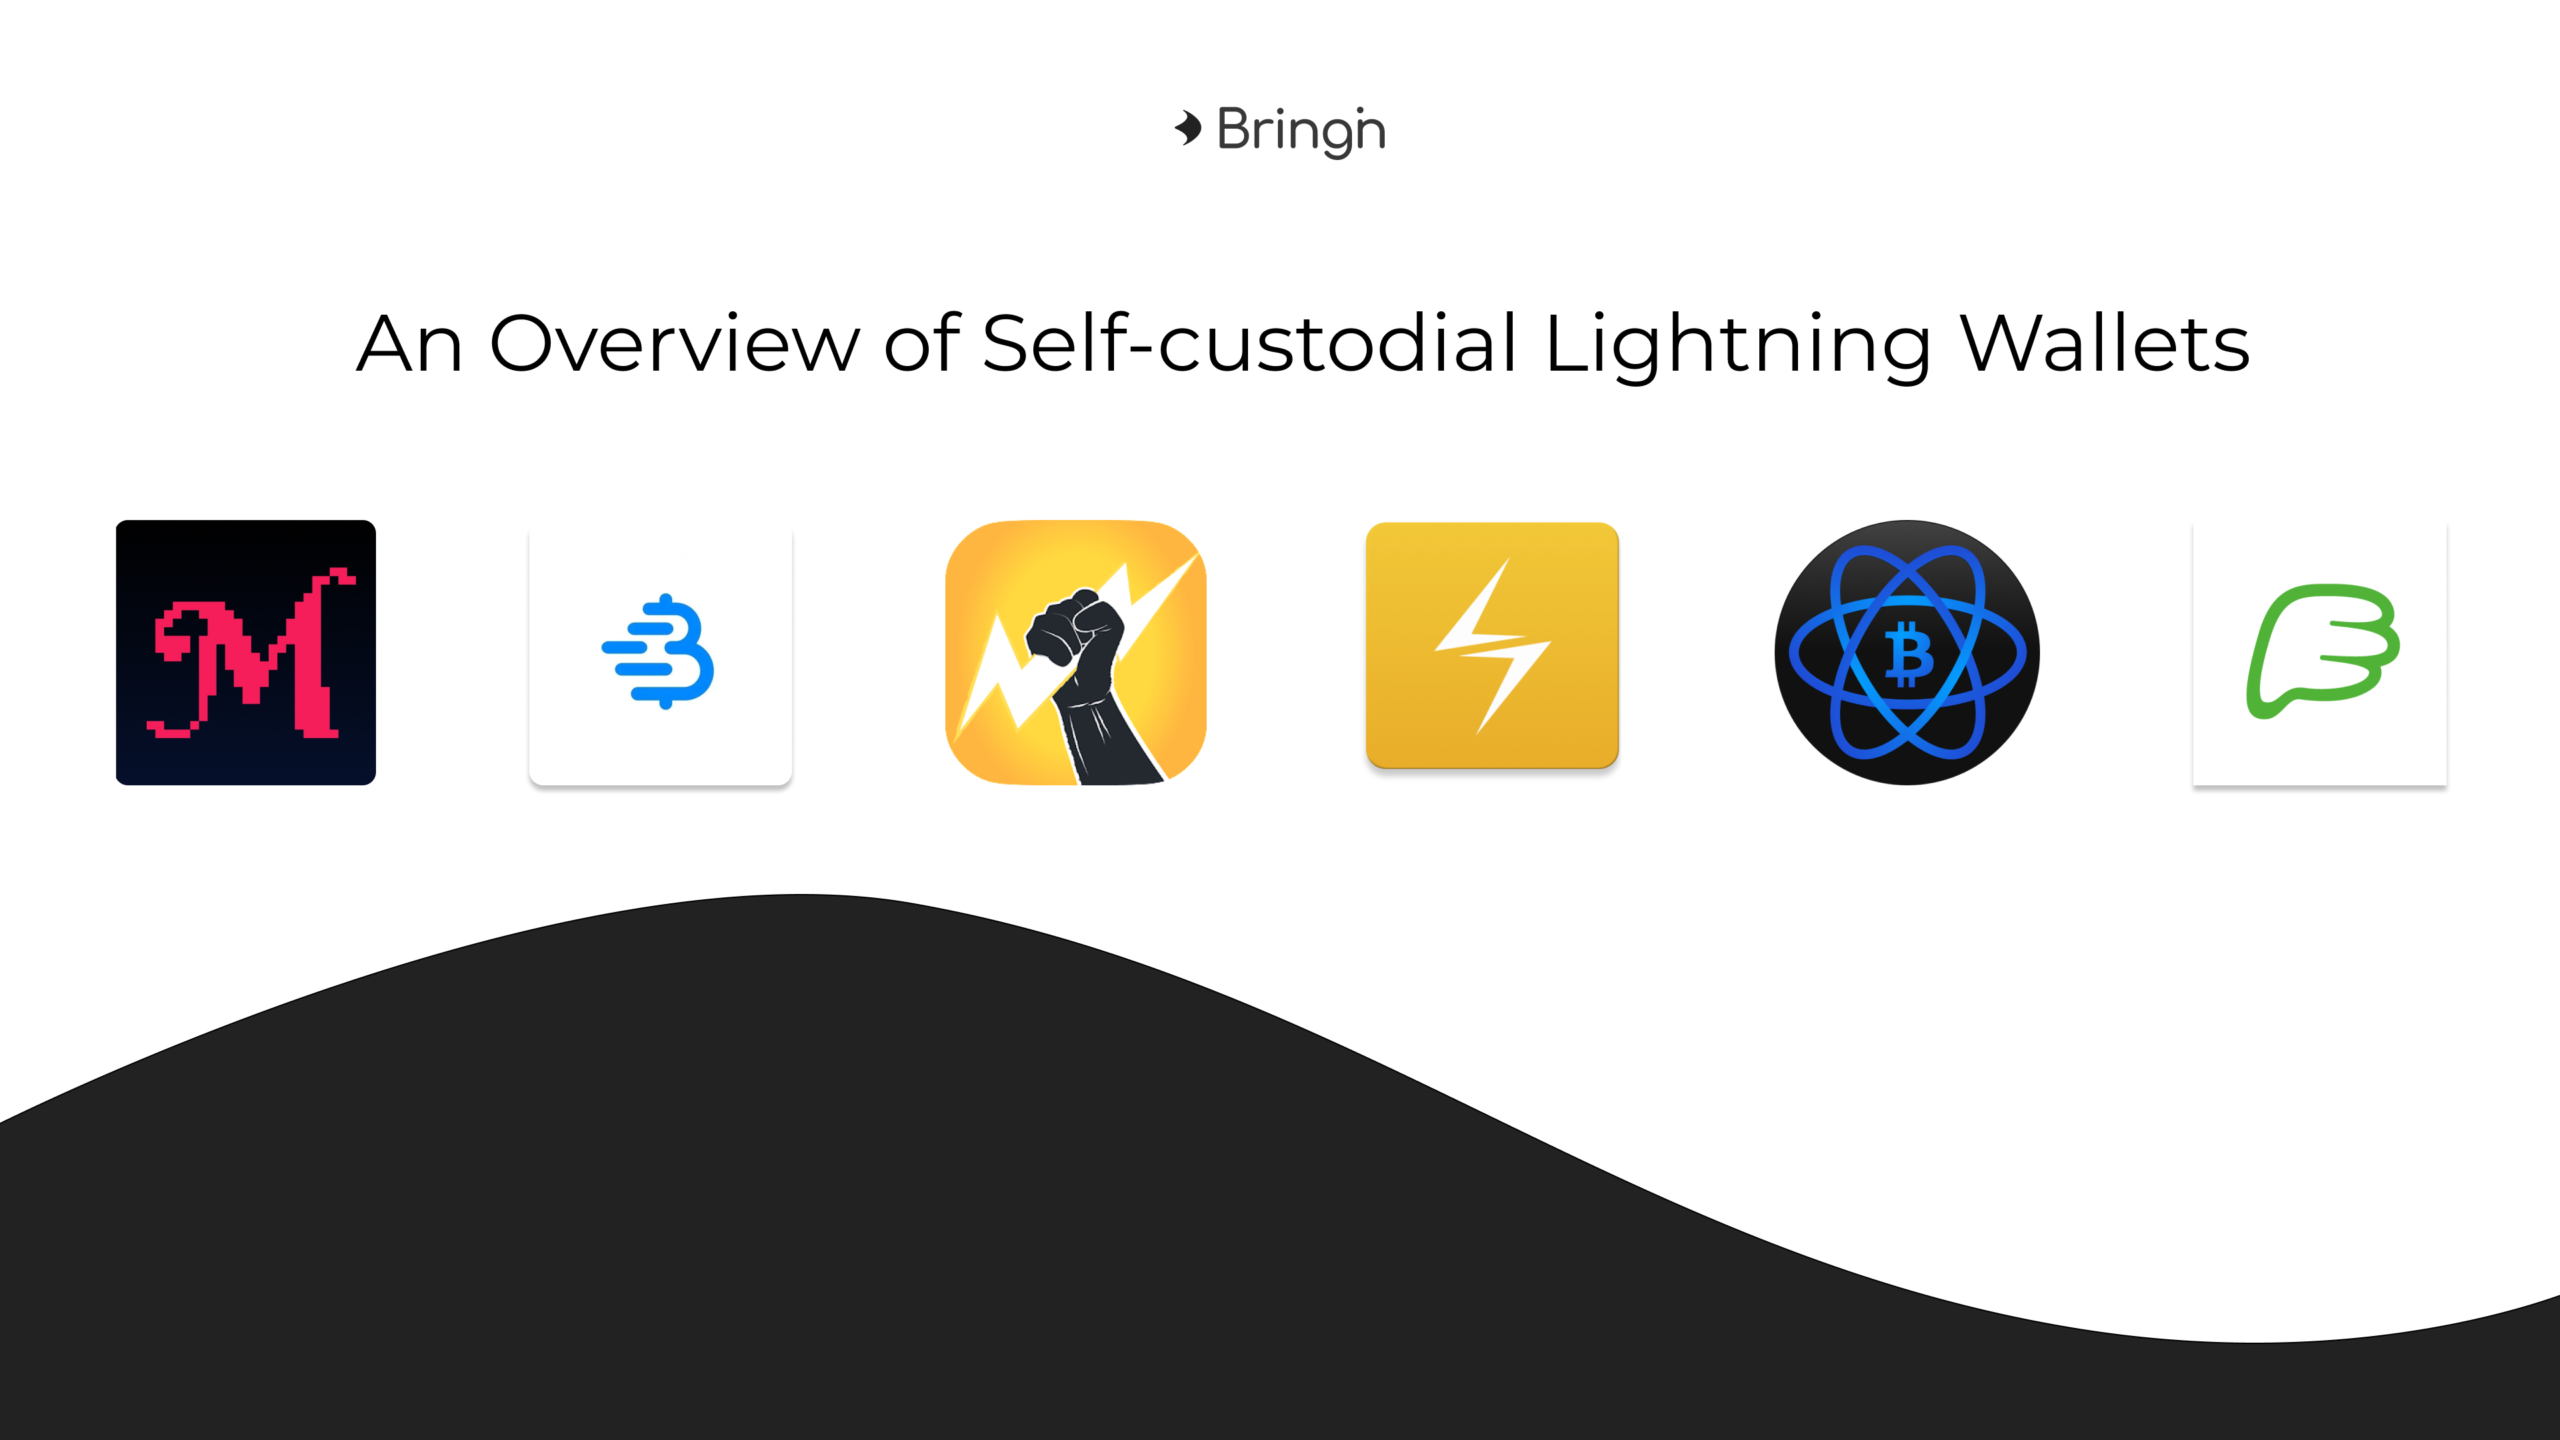 Image with logos of self-custodial Lightning wallets